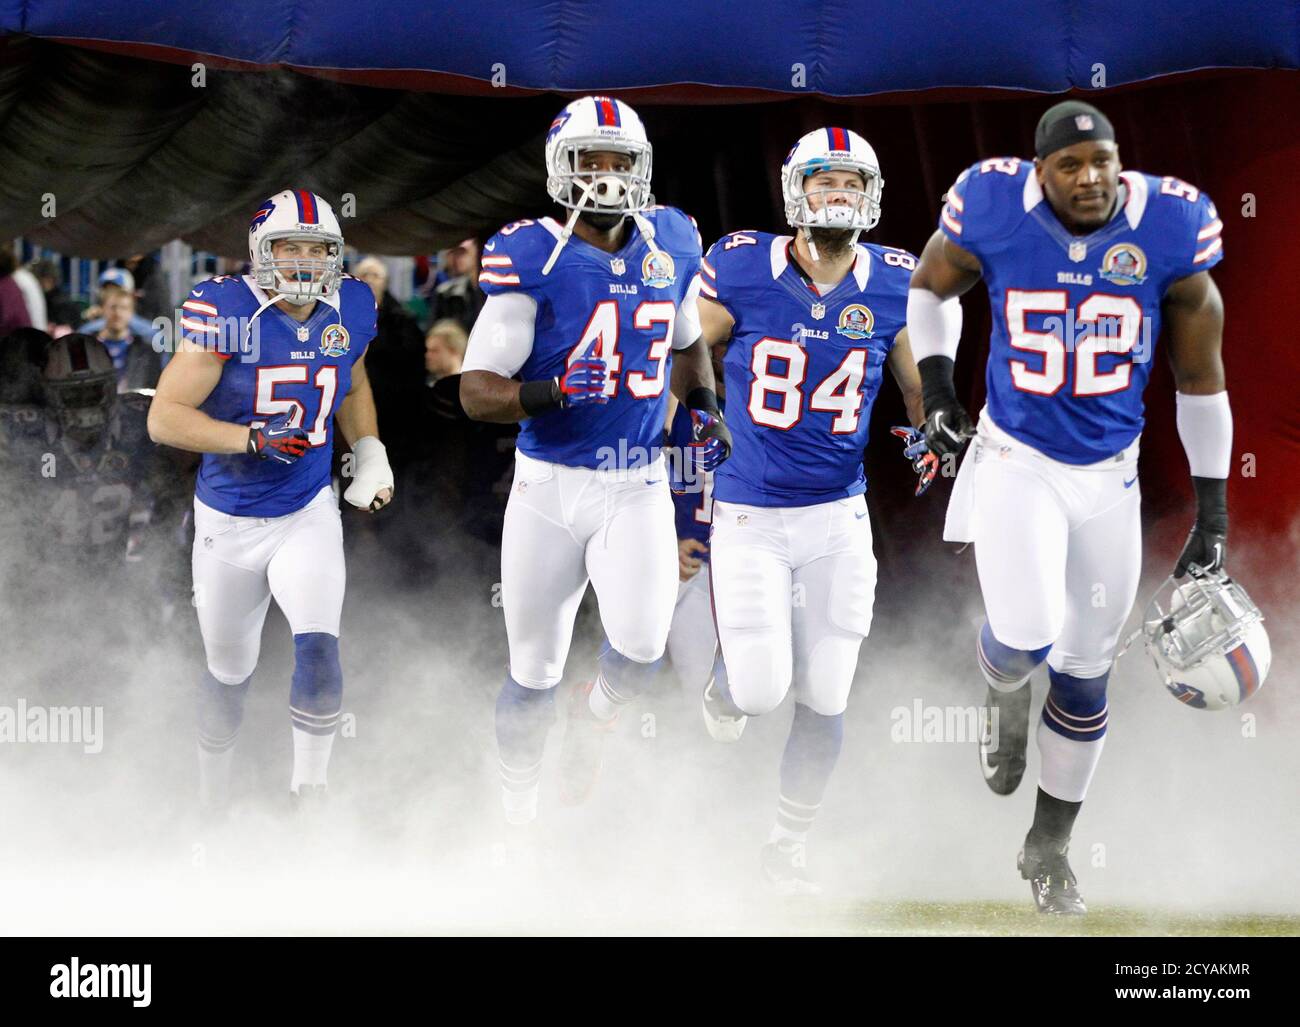 The Buffalo Bills take the before NFL football game against the Seattle Seahawks in Toronto, December 2012. REUTERS/Mark Blinch (CANADA - Tags: SPORT FOOTBALL Photo - Alamy